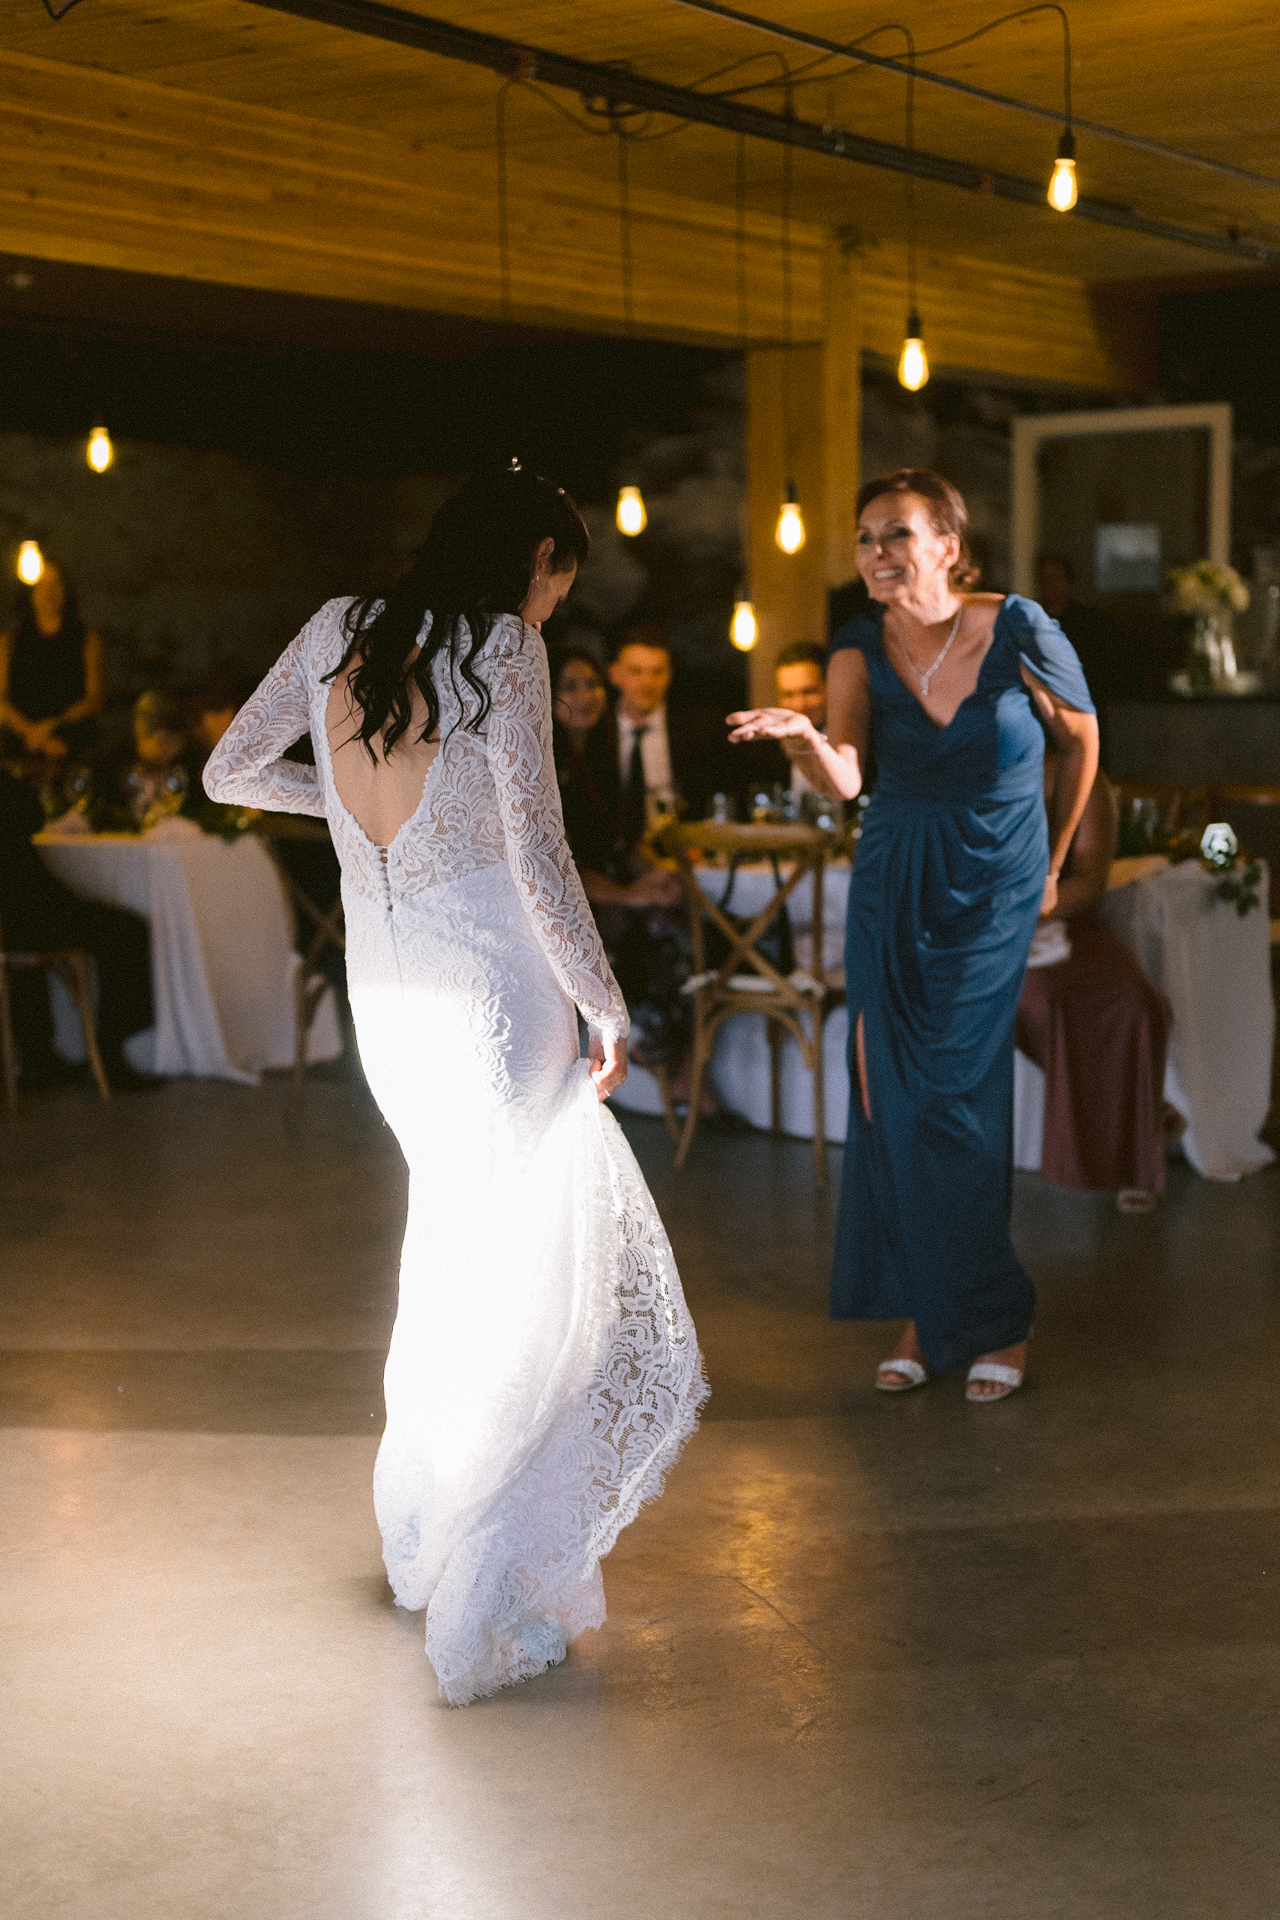 Bride dance with her mother at a wedding at Cambium Farms when Toronto wedding photographer take that moment for them.